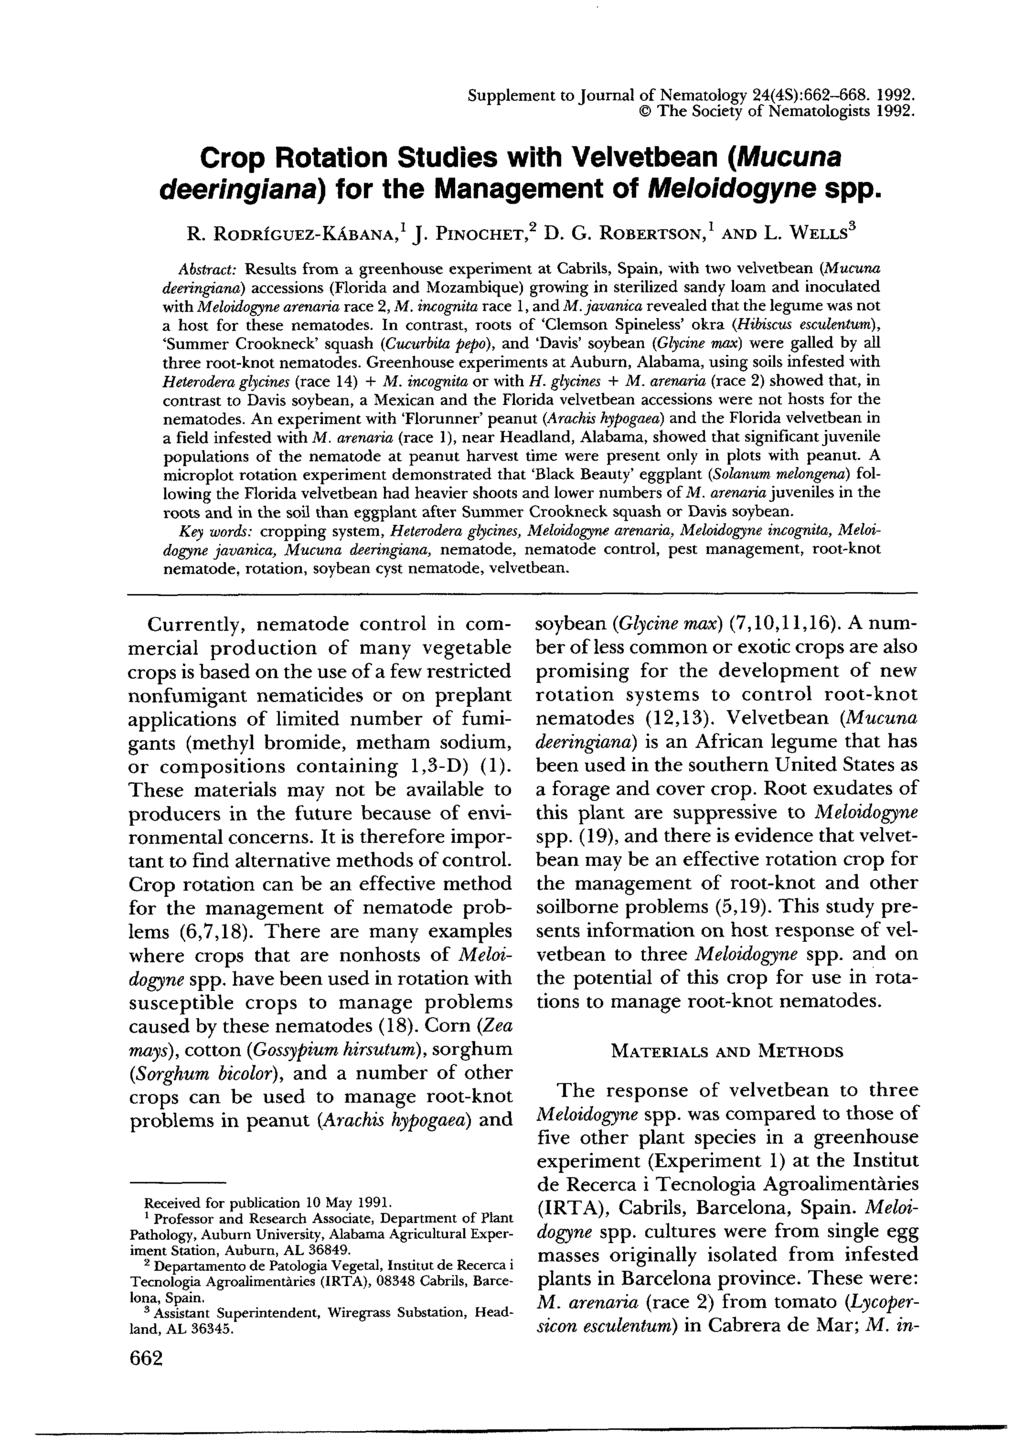 Supplement to Journal of Nematology 24(4S):662-668. 1992. The Society of Nematologists 1992. Crop Rotation Studies with Velvetbean (Mucuna deeringiana) for the Management of Meloidogyne spp. R. RODRfGUEz-KABANA, 1 J.